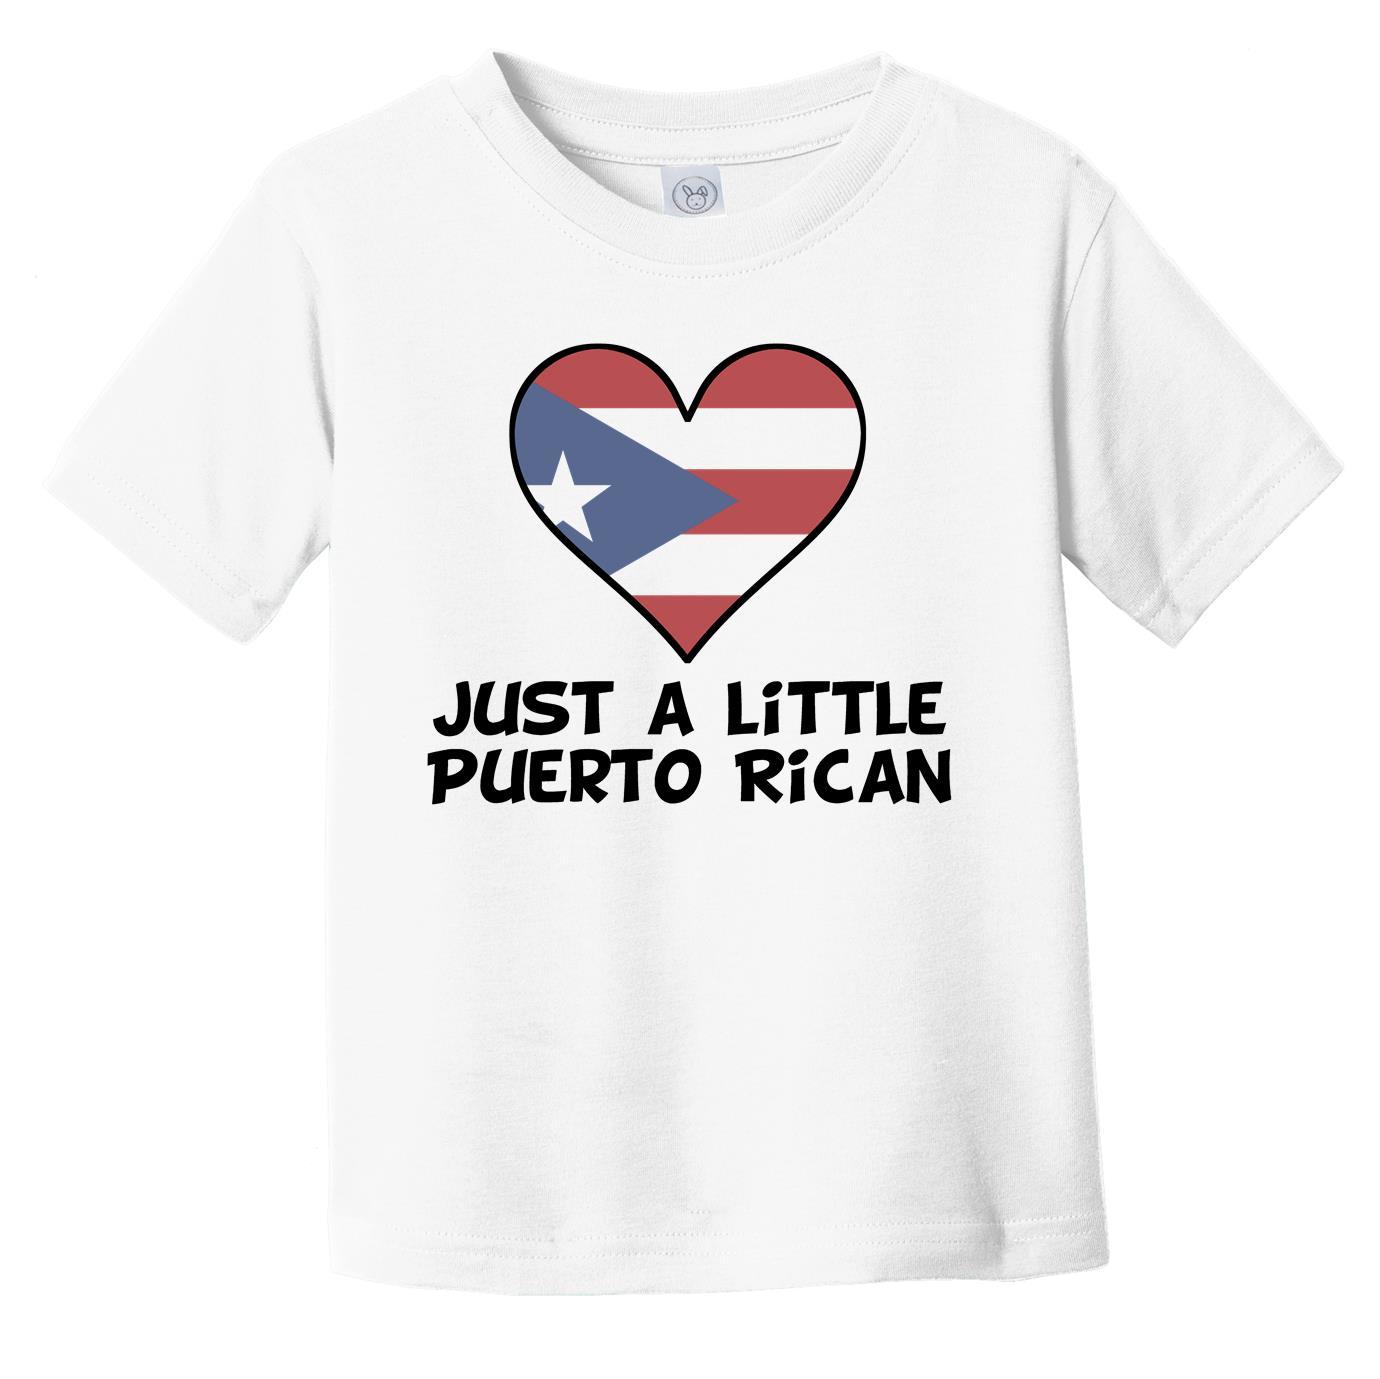 Just A Little Puerto Rican T-Shirt - Funny Puerto Rico Flag Infant Toddler Shirt